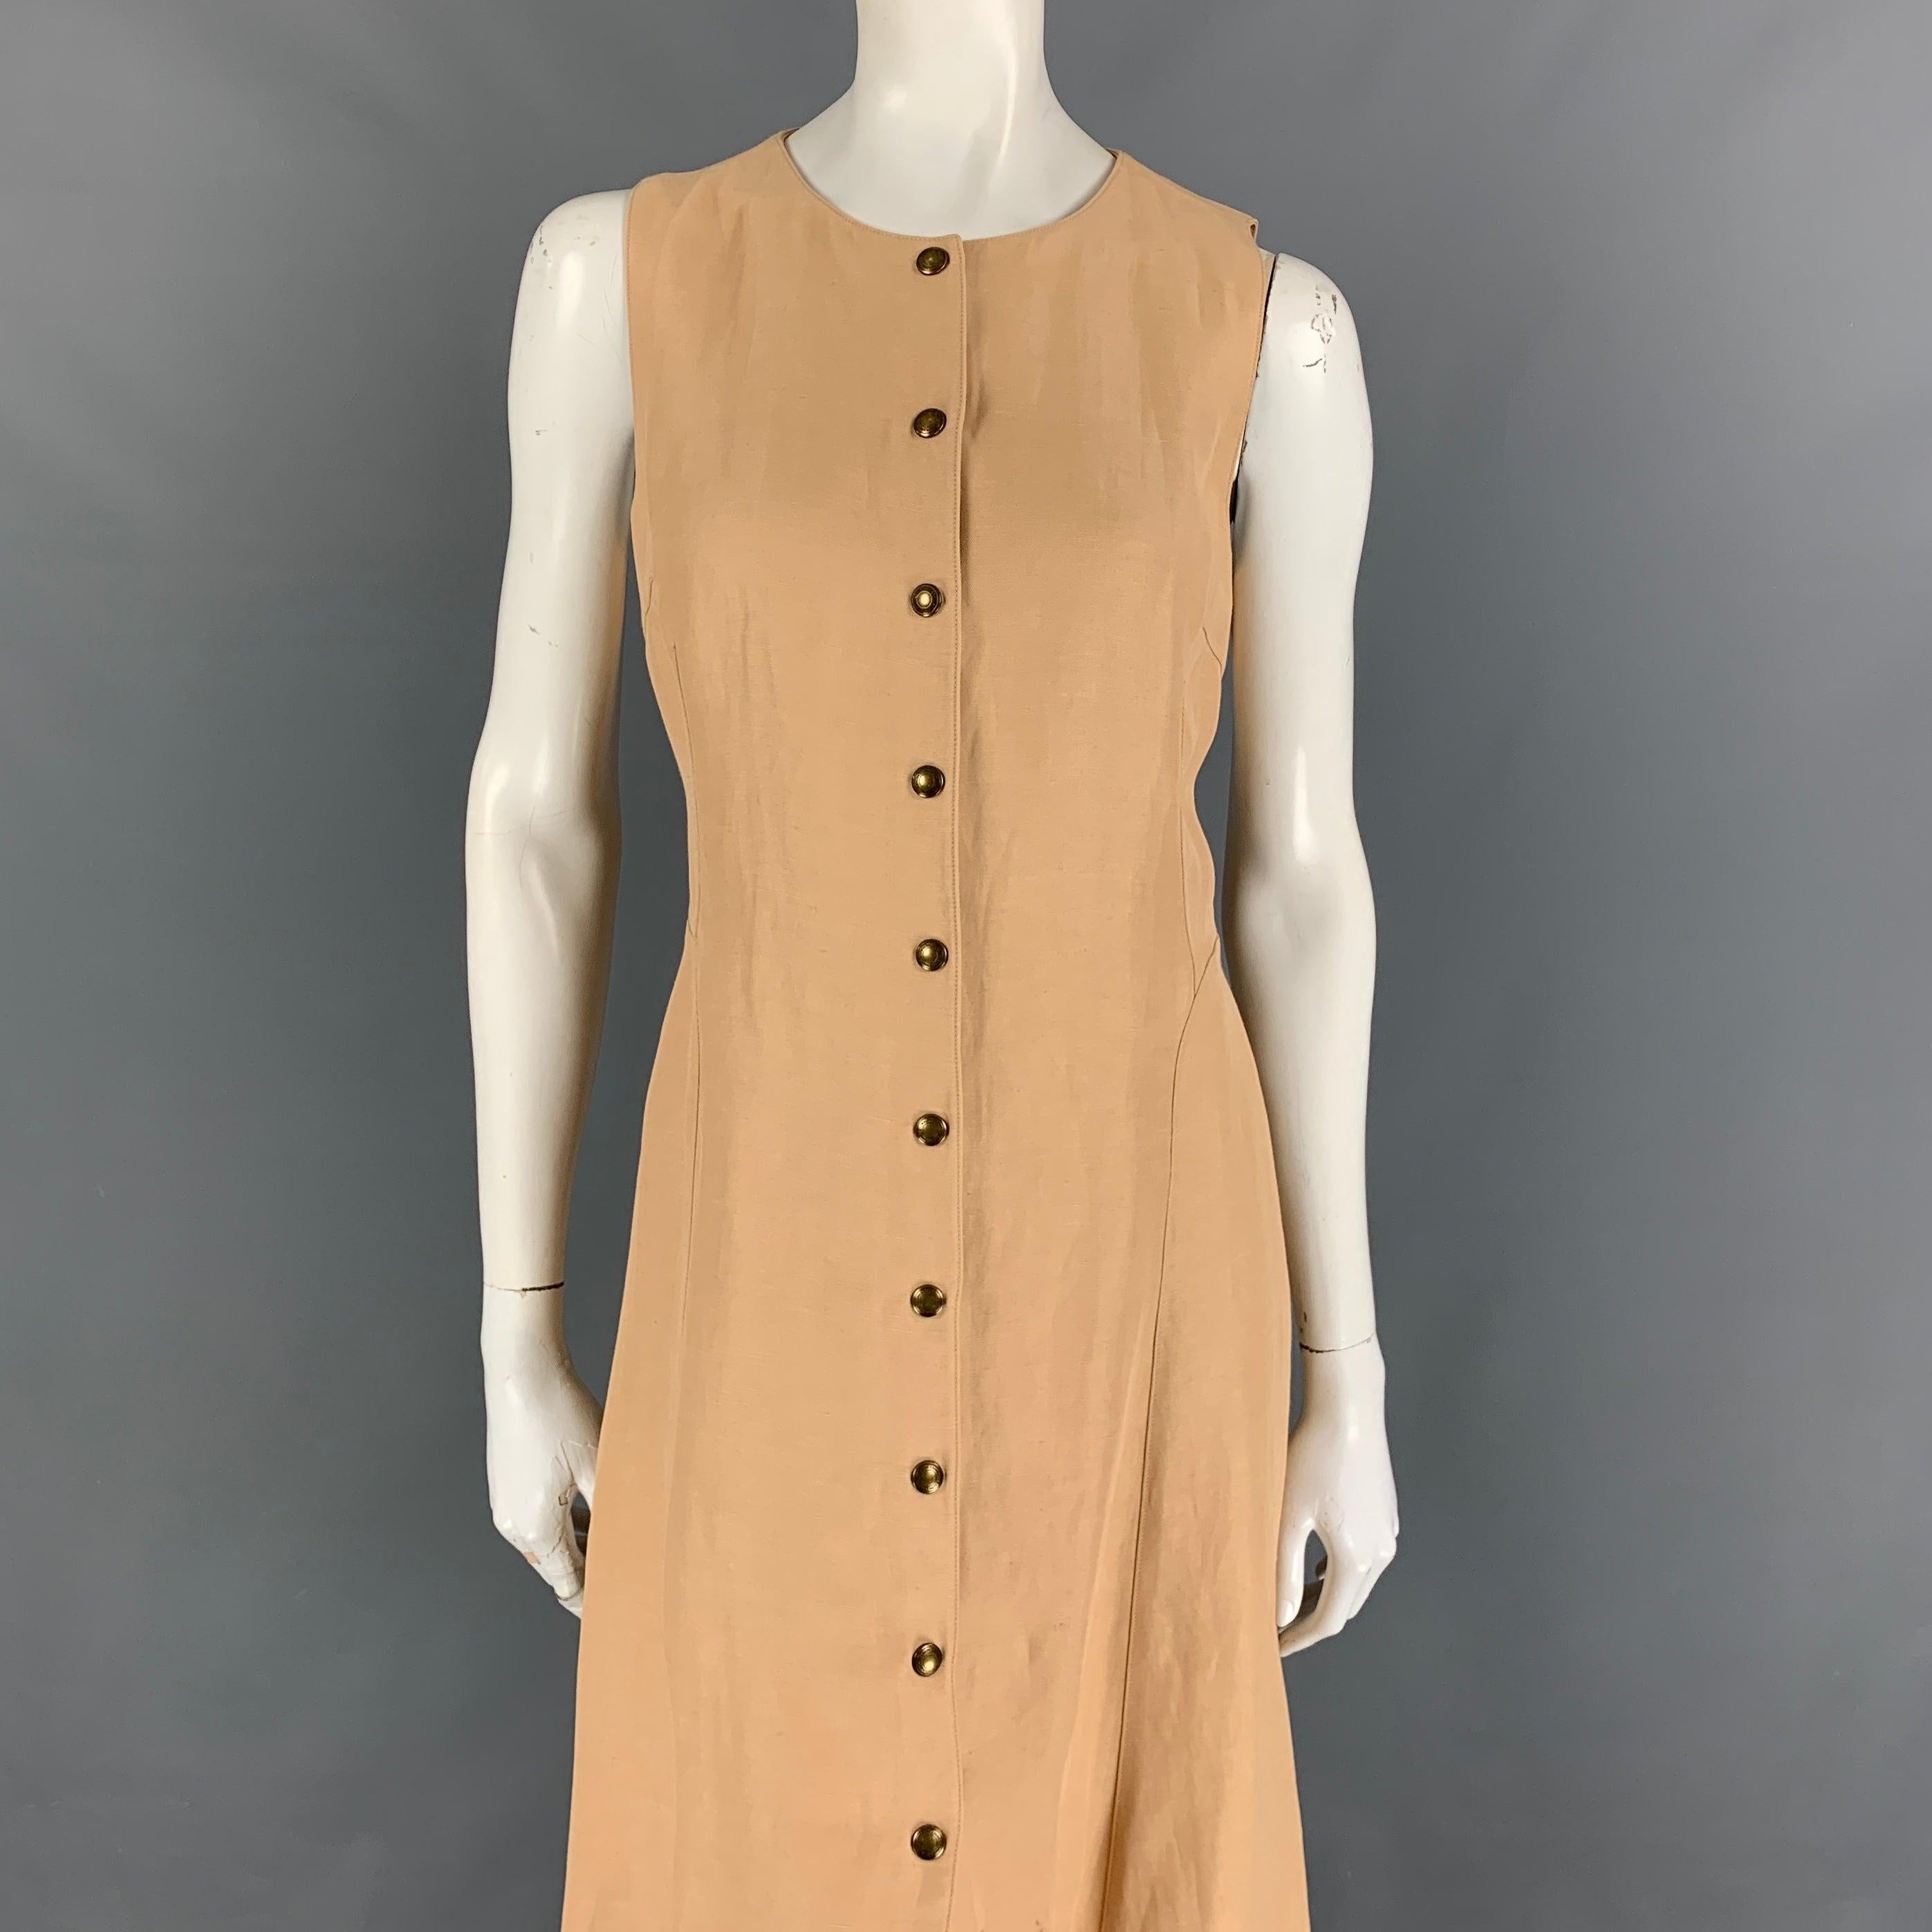 RALPH LAUREN Collection dress comes in a beige acetate featuring an a-line style, sleeveless, and a front snap button closure.
Good
Pre-Owned Condition. 

Marked:   8 

Measurements: 
 
Shoulder: 13 inches  Bust: 34 inches  Waist: 30 inches  Hip: 40